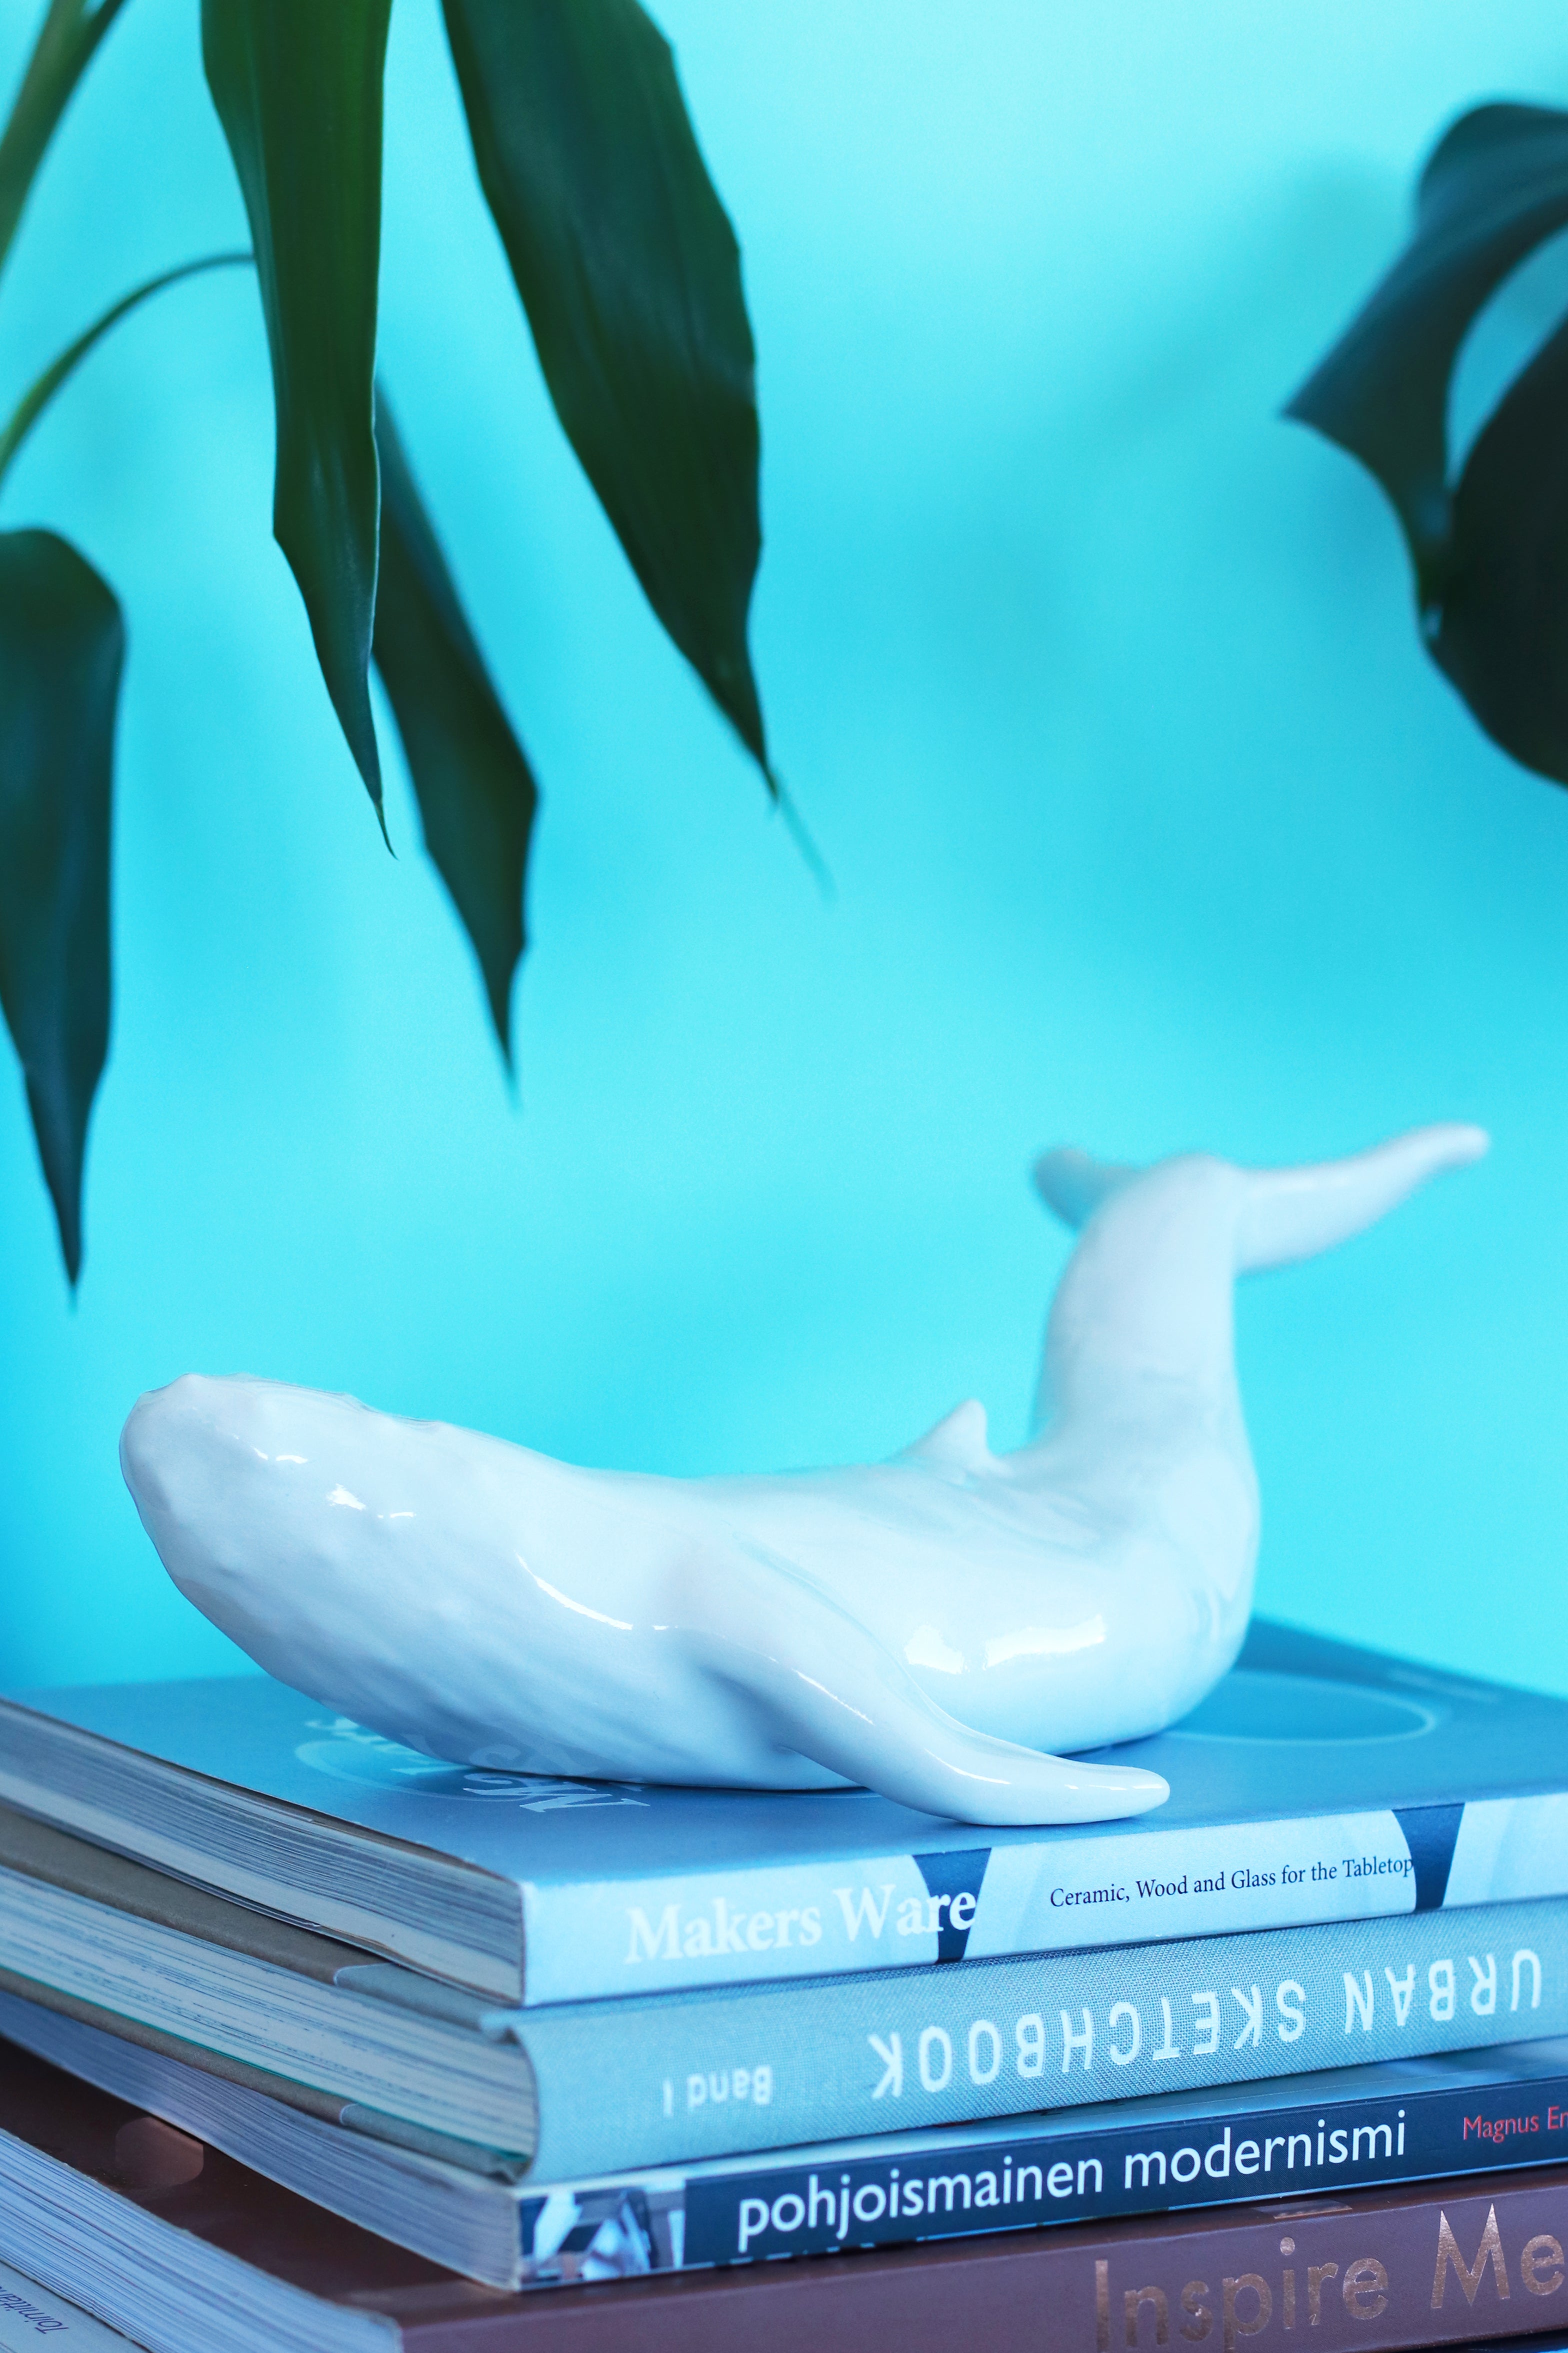 White ceramic humpback whale artwork that is placed on top of art and design books. The background is turquoise and there are plant leaves against it.